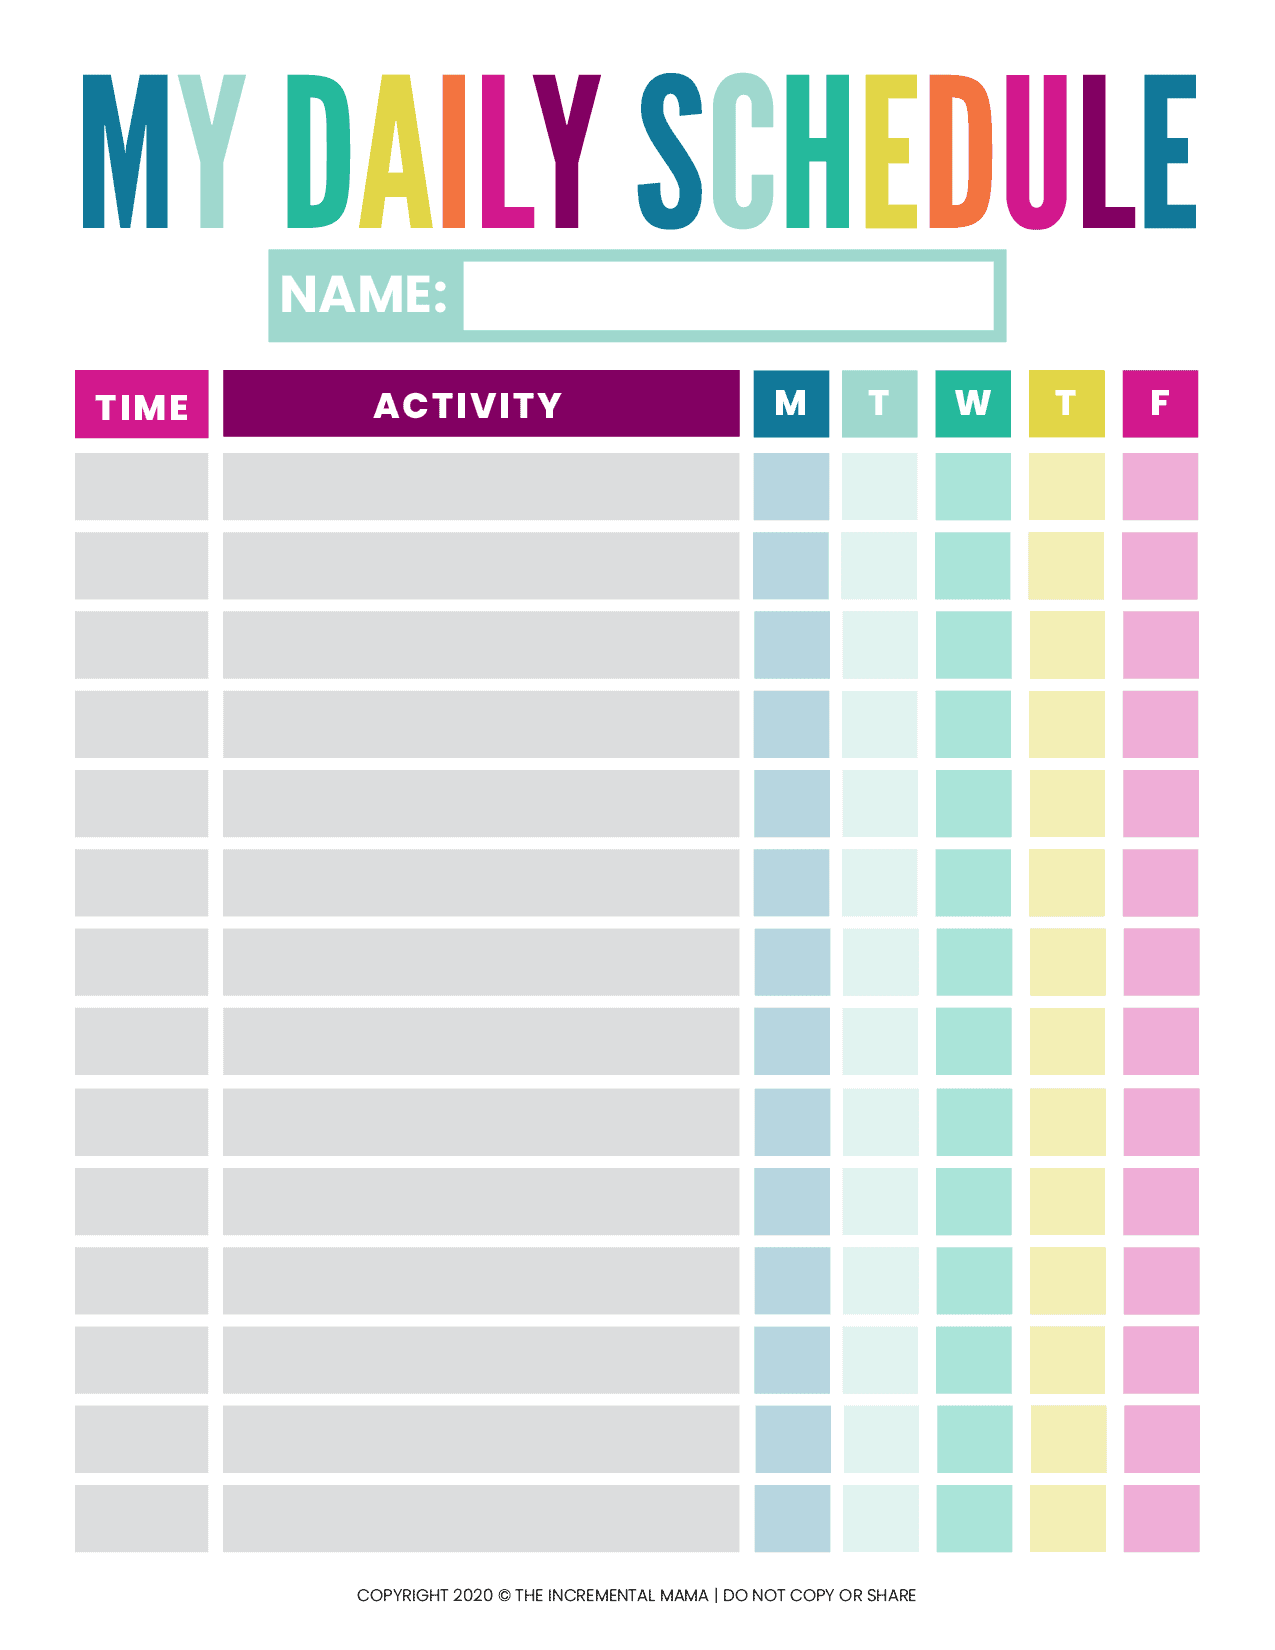 daily tasks schedule templates for kids